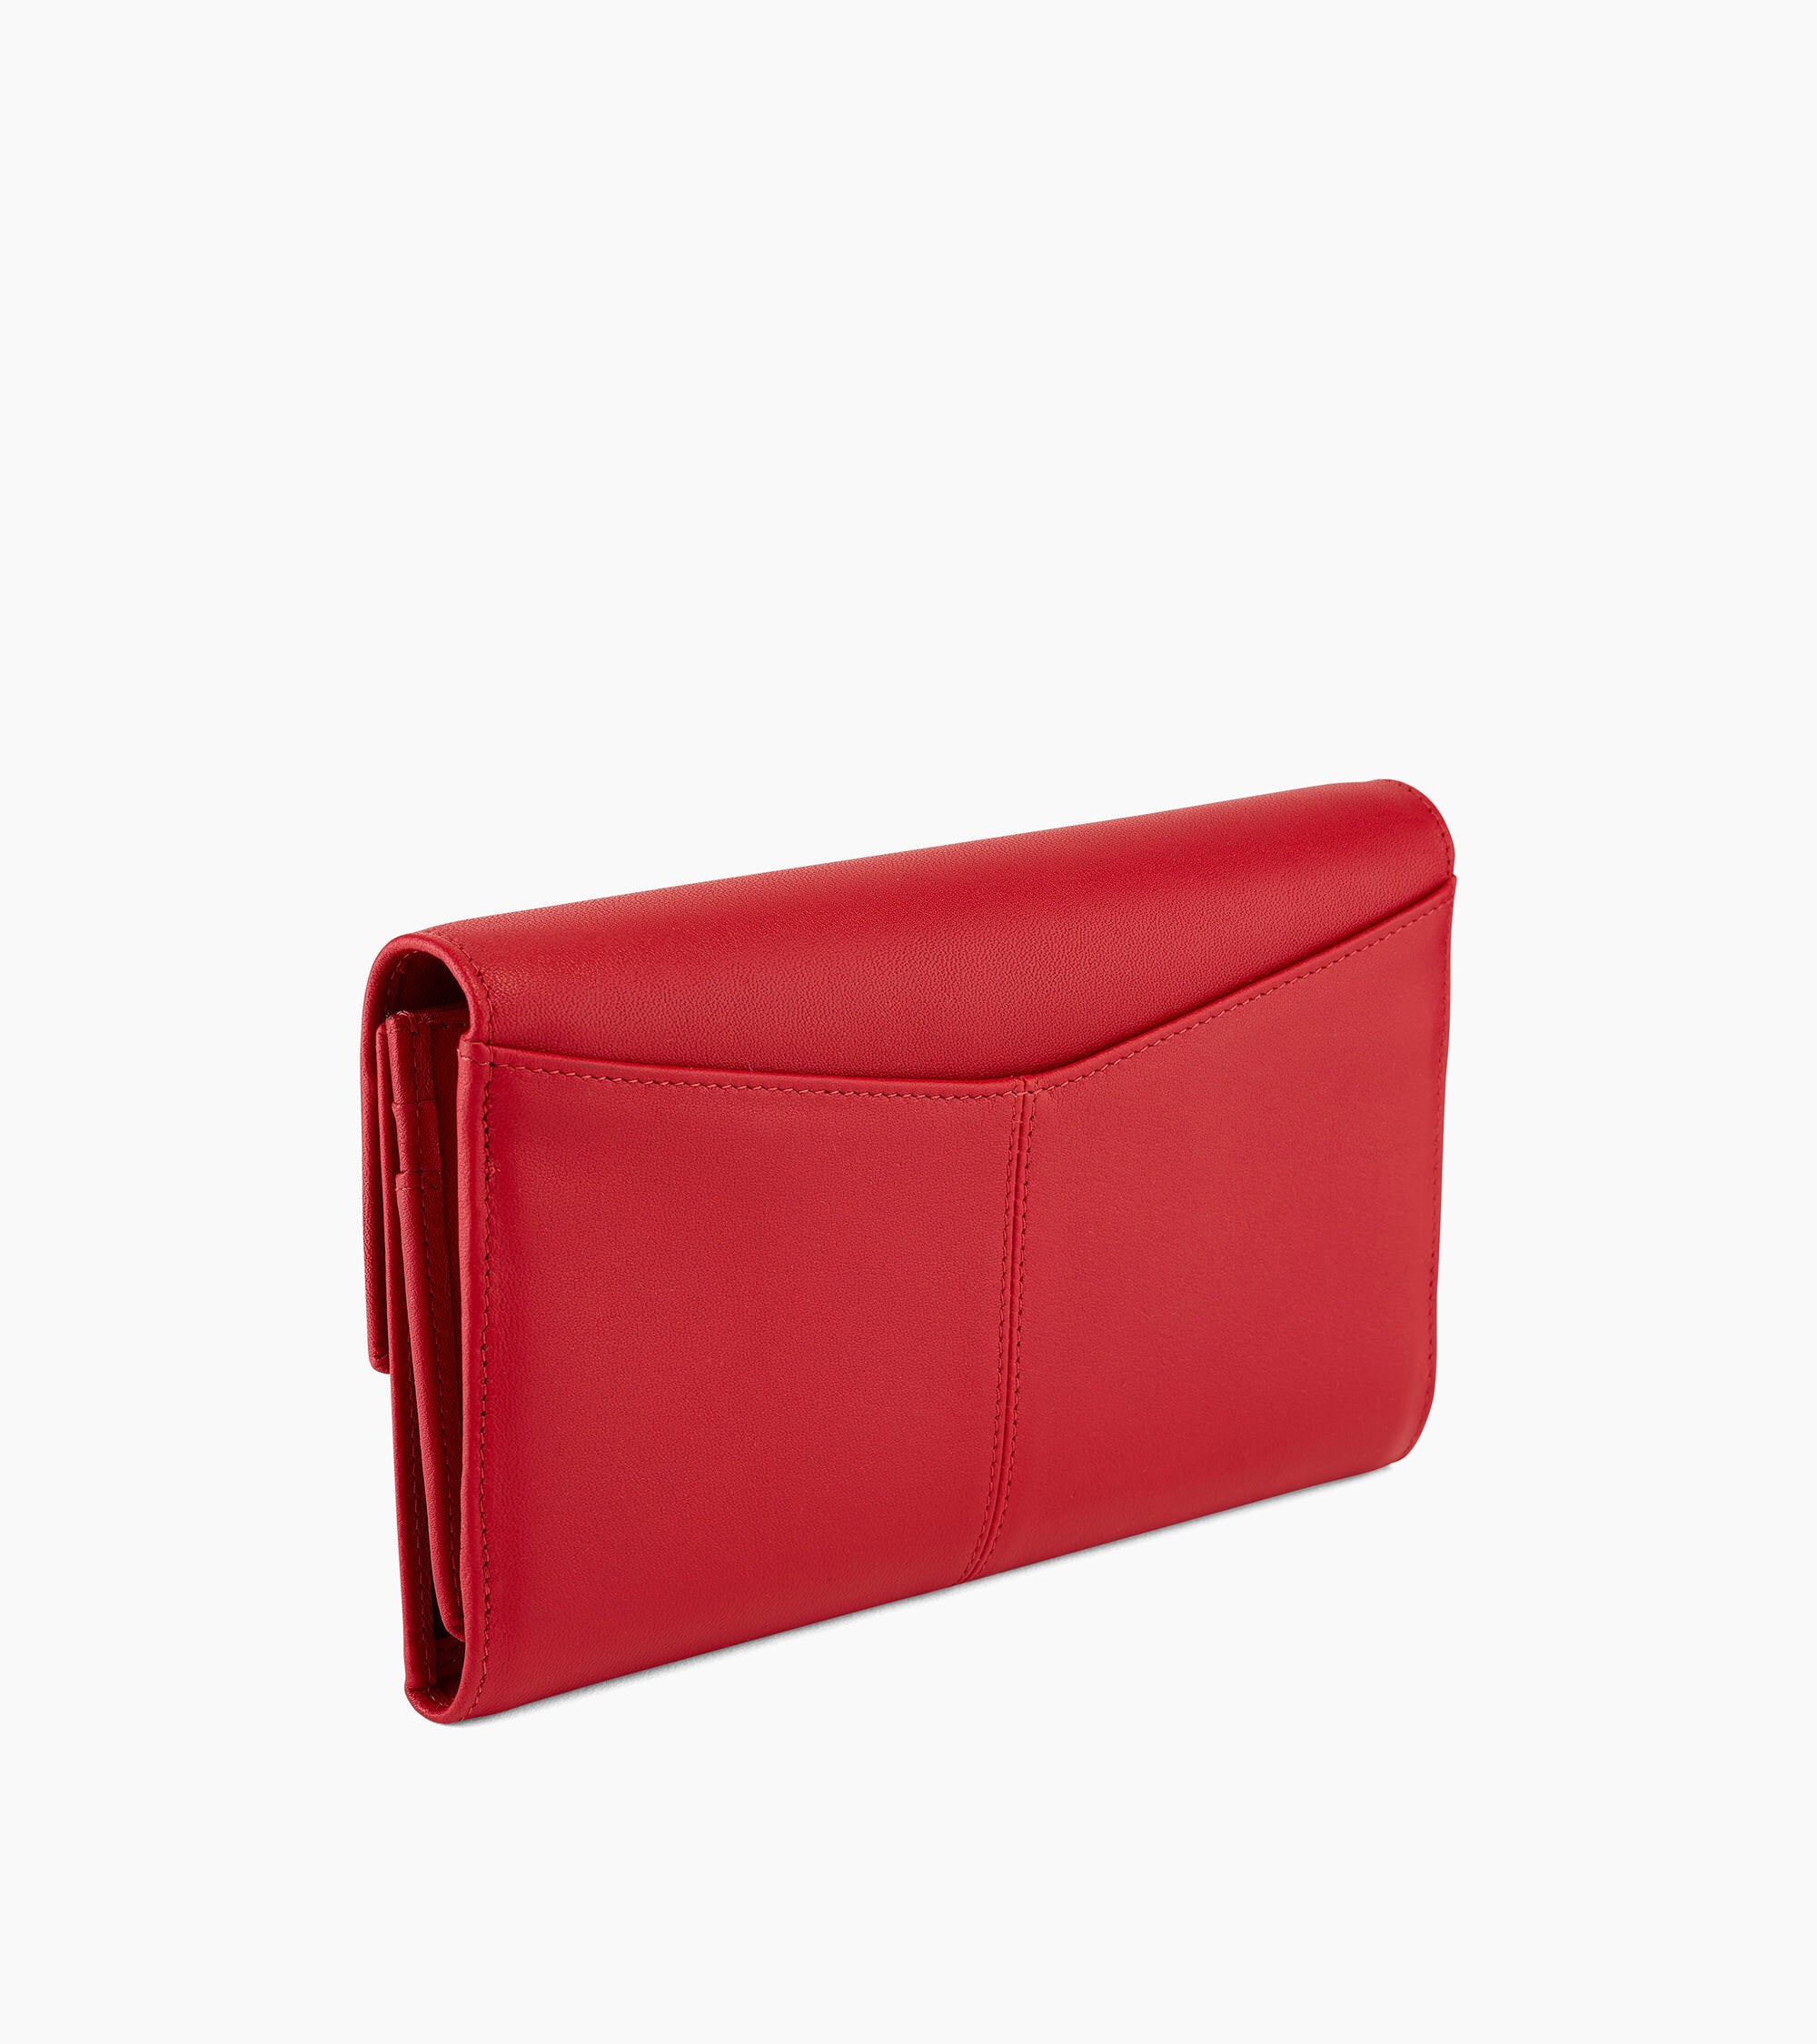 Charlotte flap organizer wallet in smooth leather